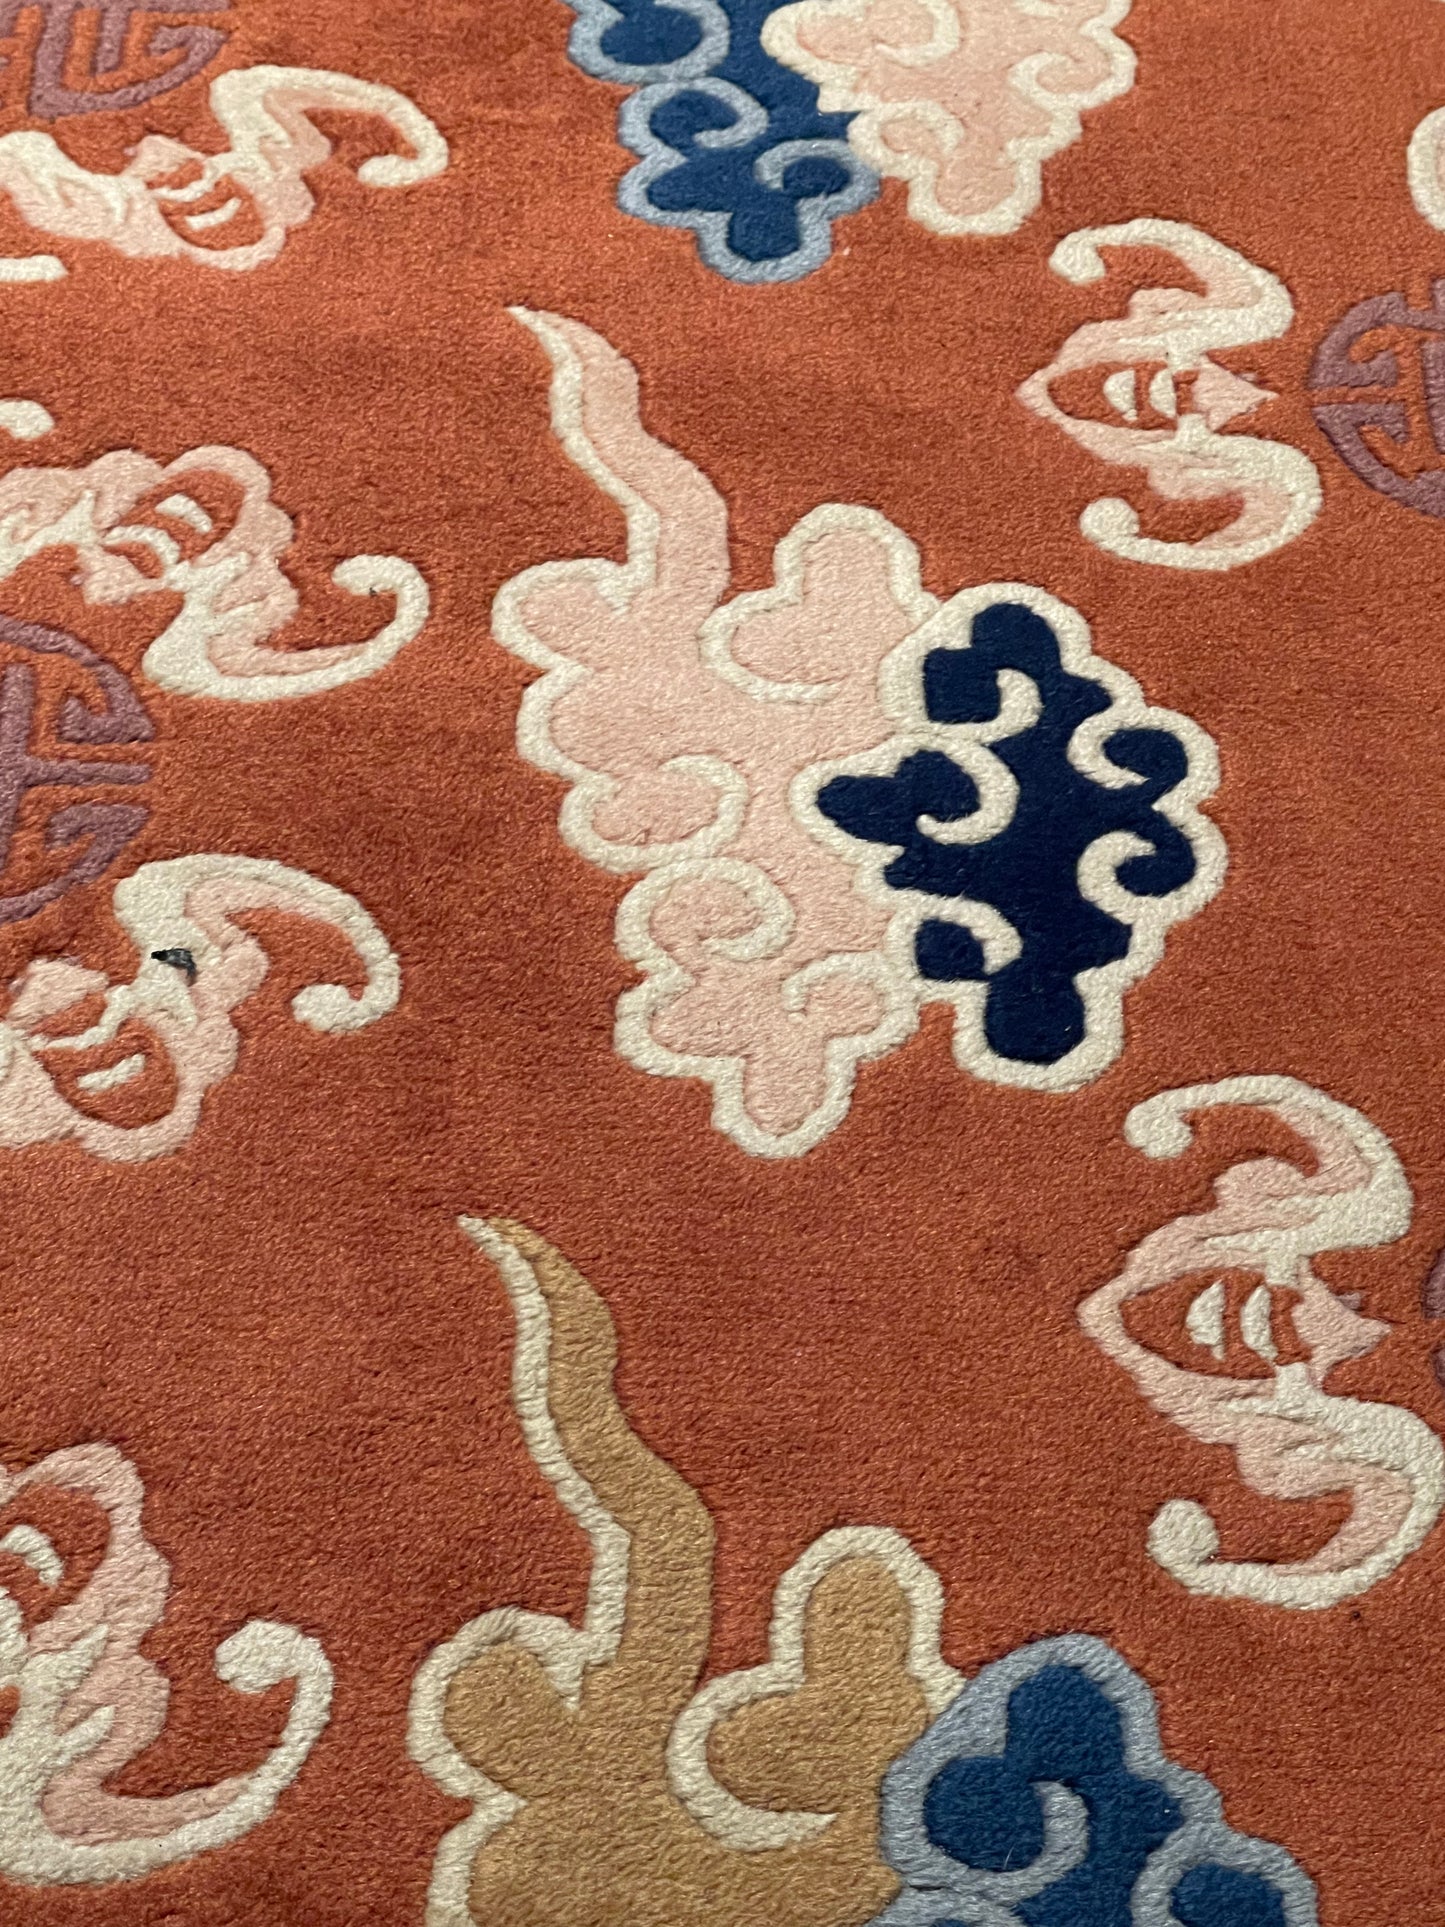 A mid 20th C. Peking rug with clouds and bats motifs